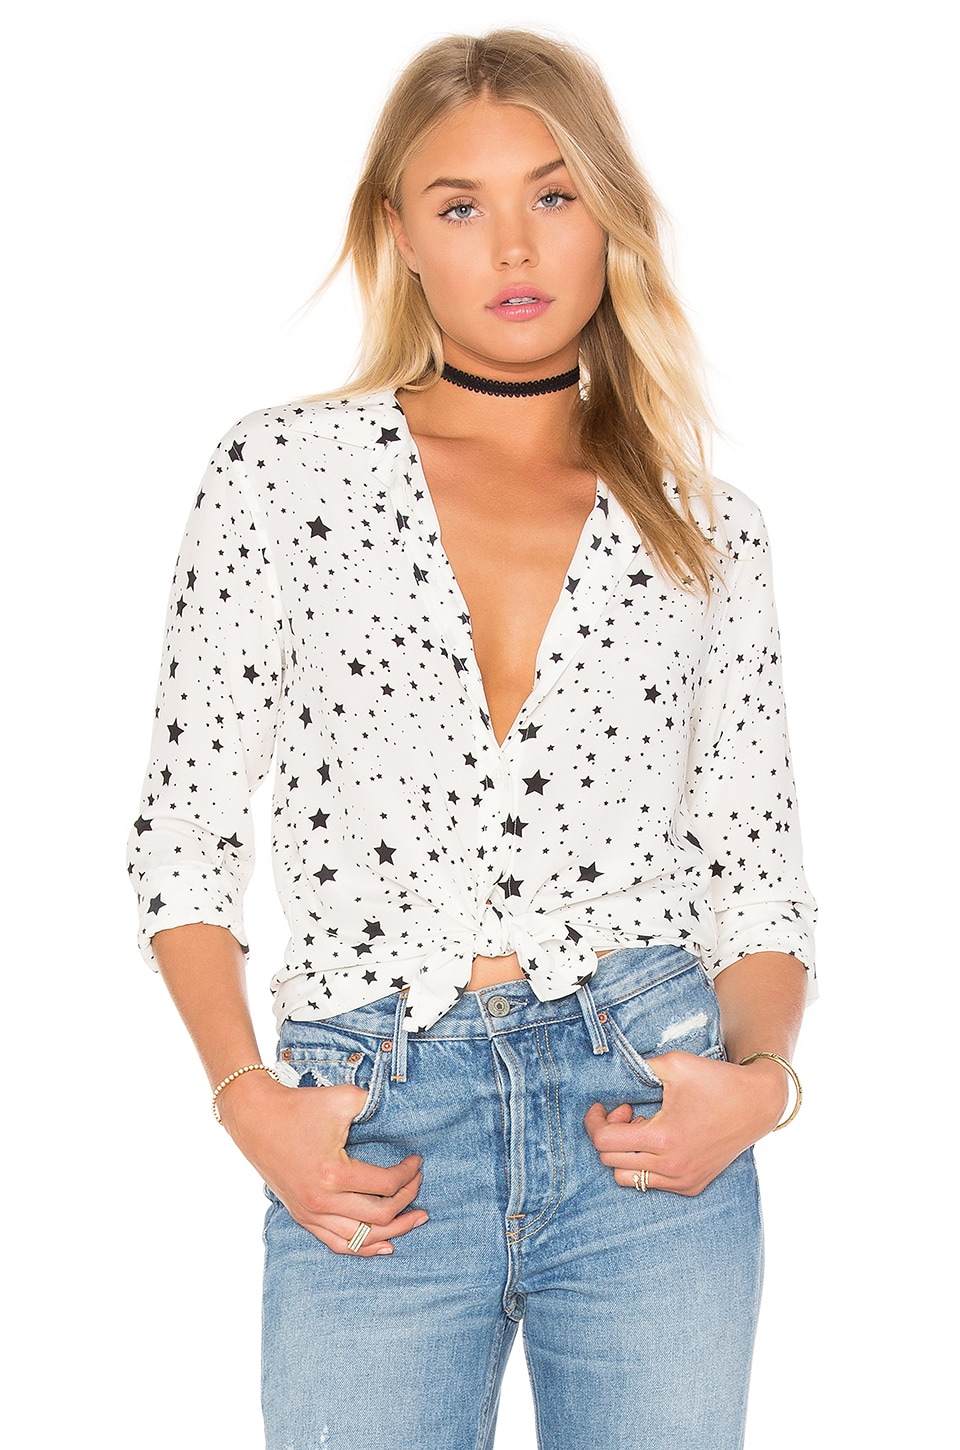 Equipment Kate Moss for Equipment Slim Signature Star Print Button Up ...